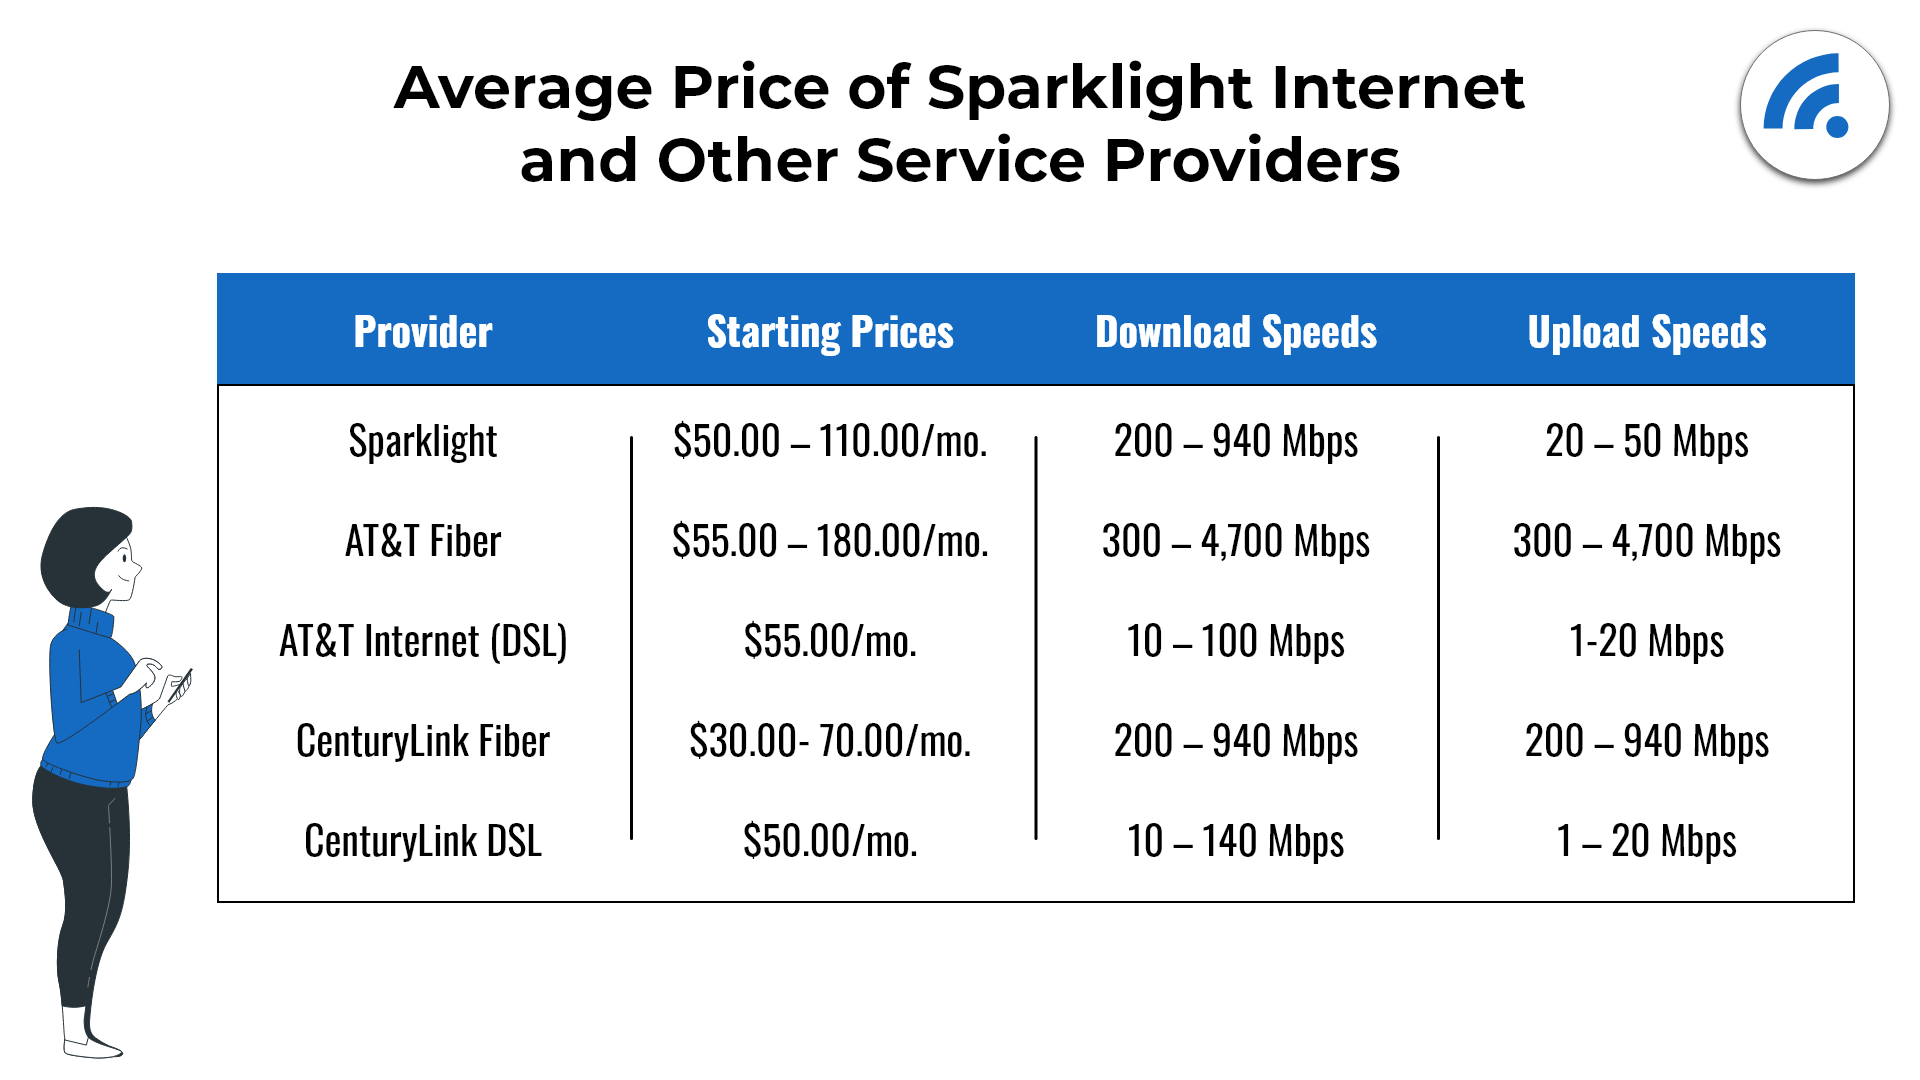 Table comparison of the Average price of Sparklight internet and other internet providers